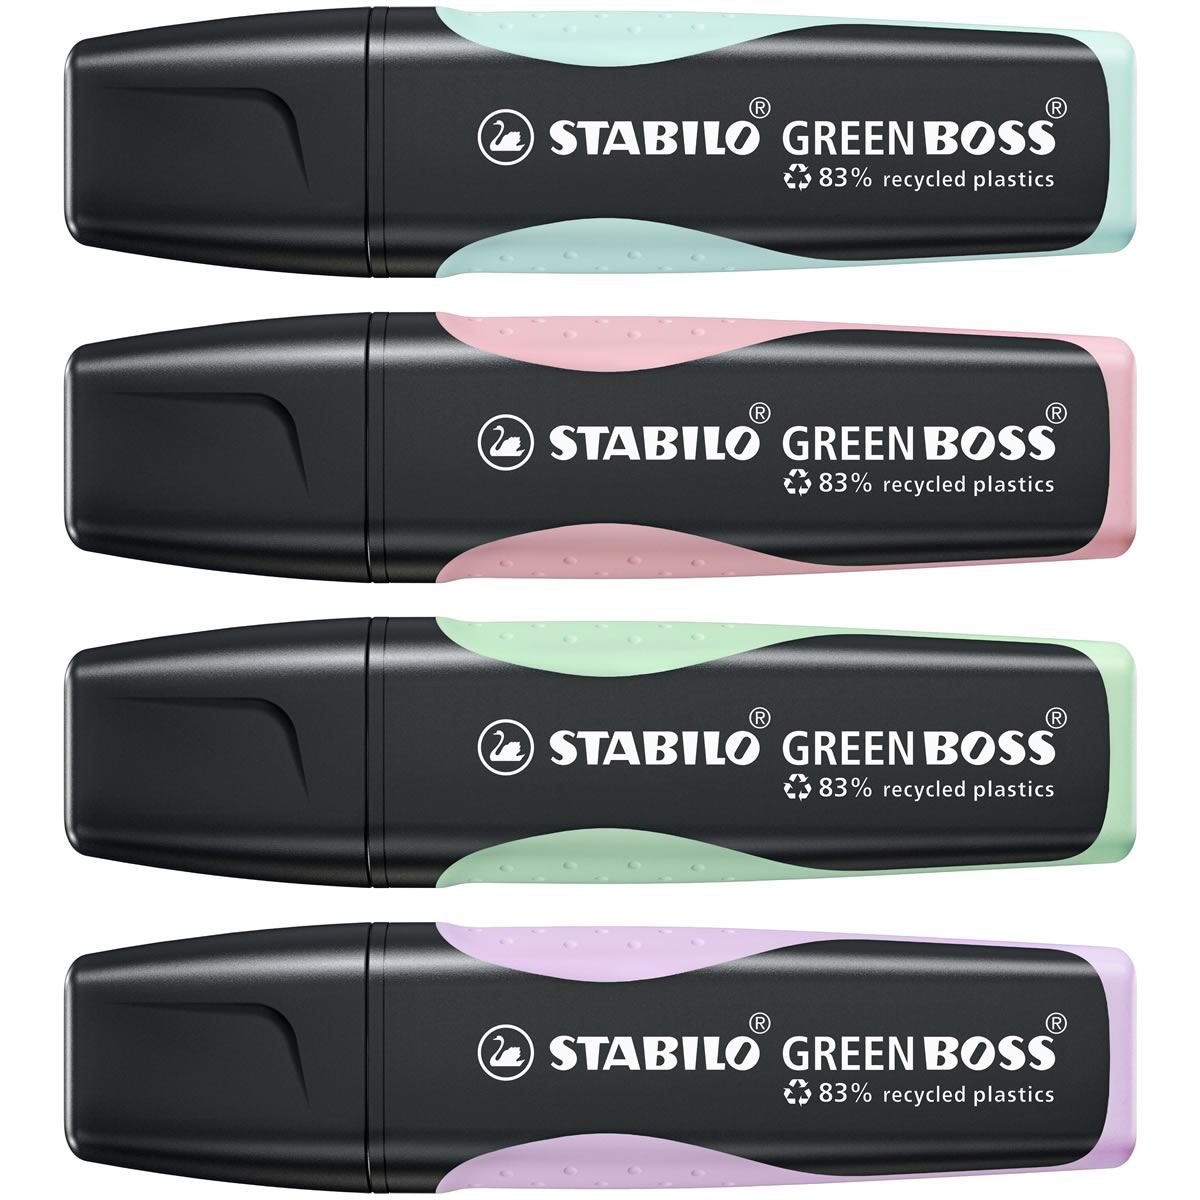 STABILO GREEN BOSS Pastel Highlighters - Pack of 4